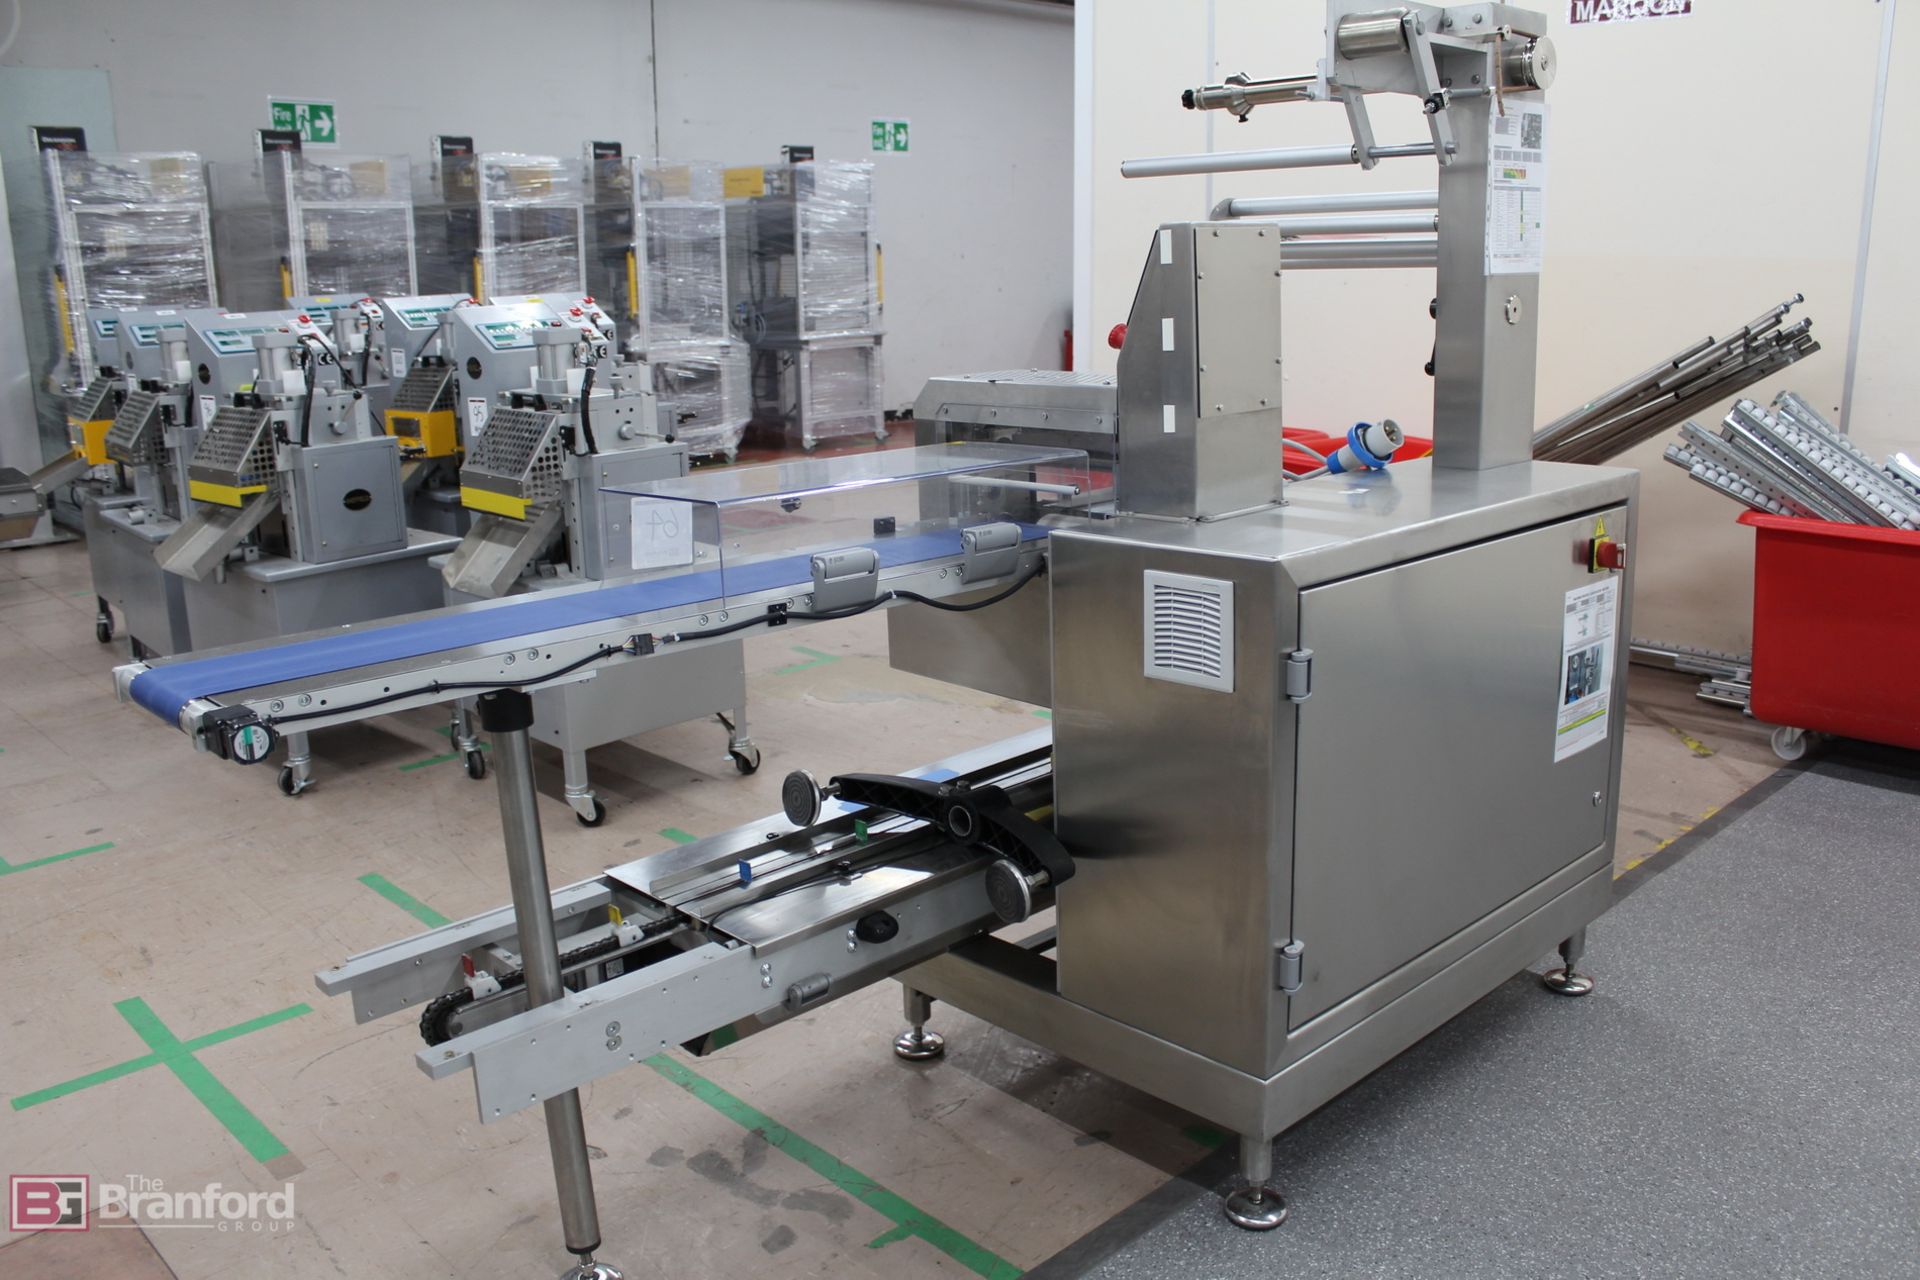 LMC/Tisomi LM450 Stainless Steel Wrapping Machine - Image 2 of 3